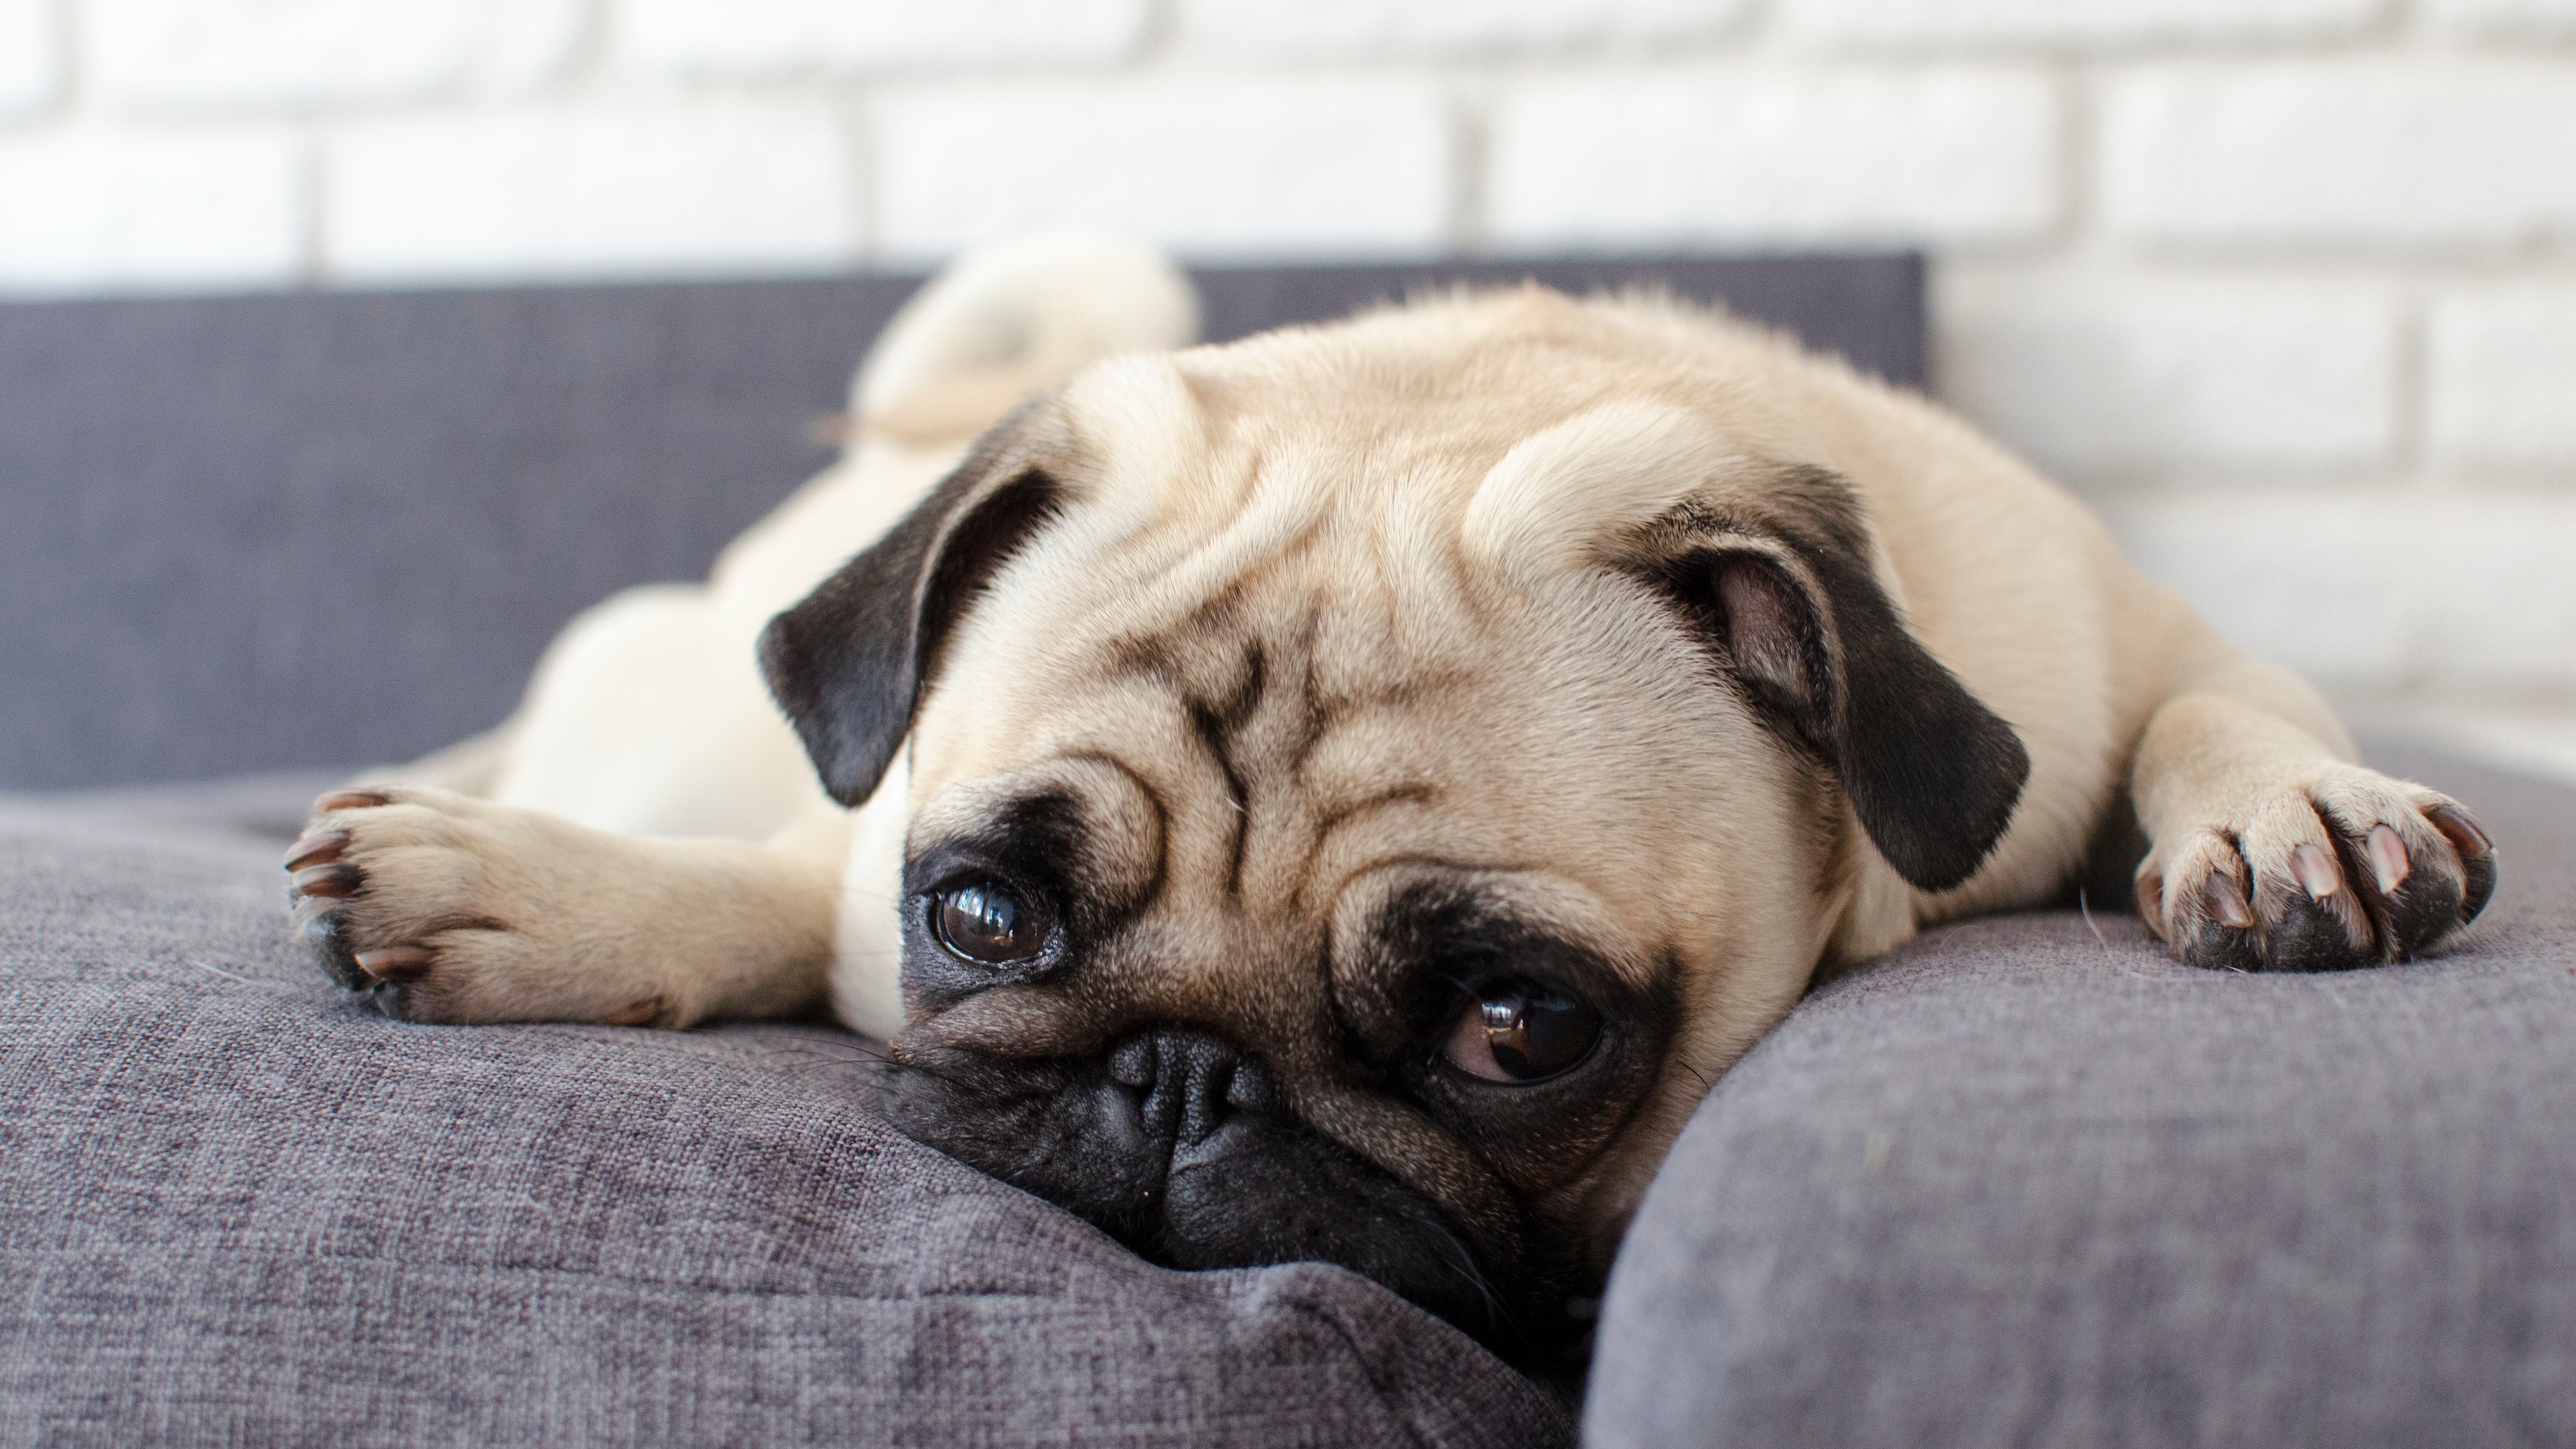 A pug dog laying on top of a couch.